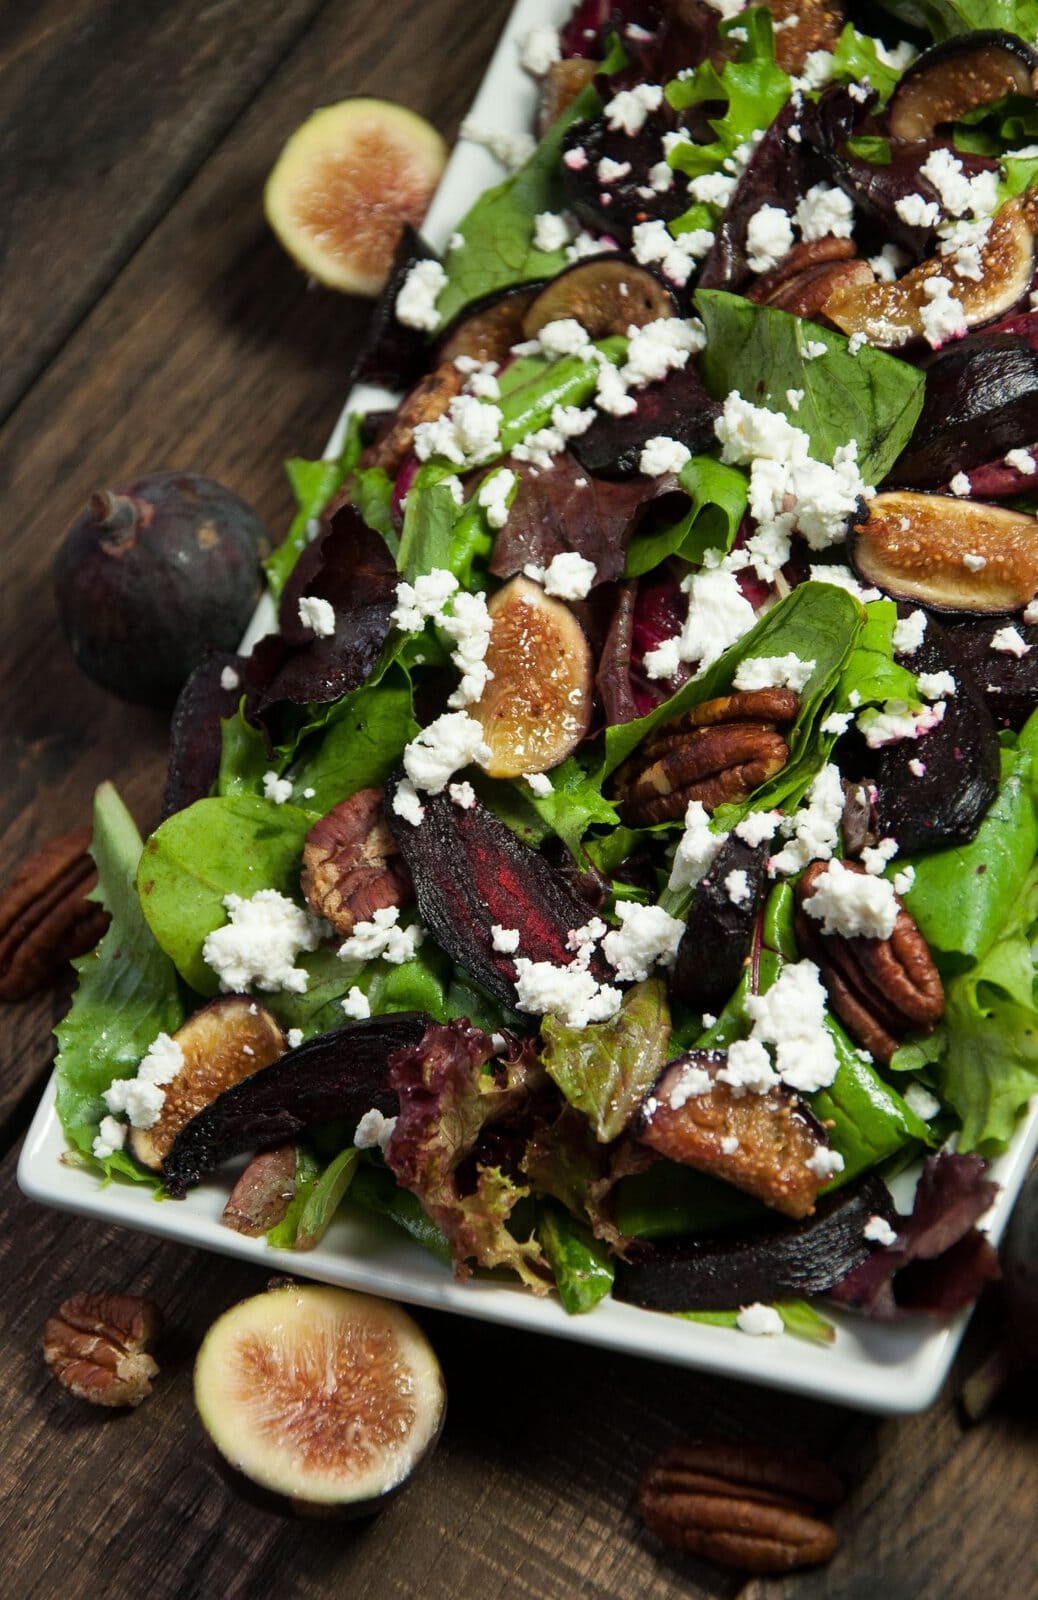 Beet Salad with Feta and Figs - Feasting not Fasting